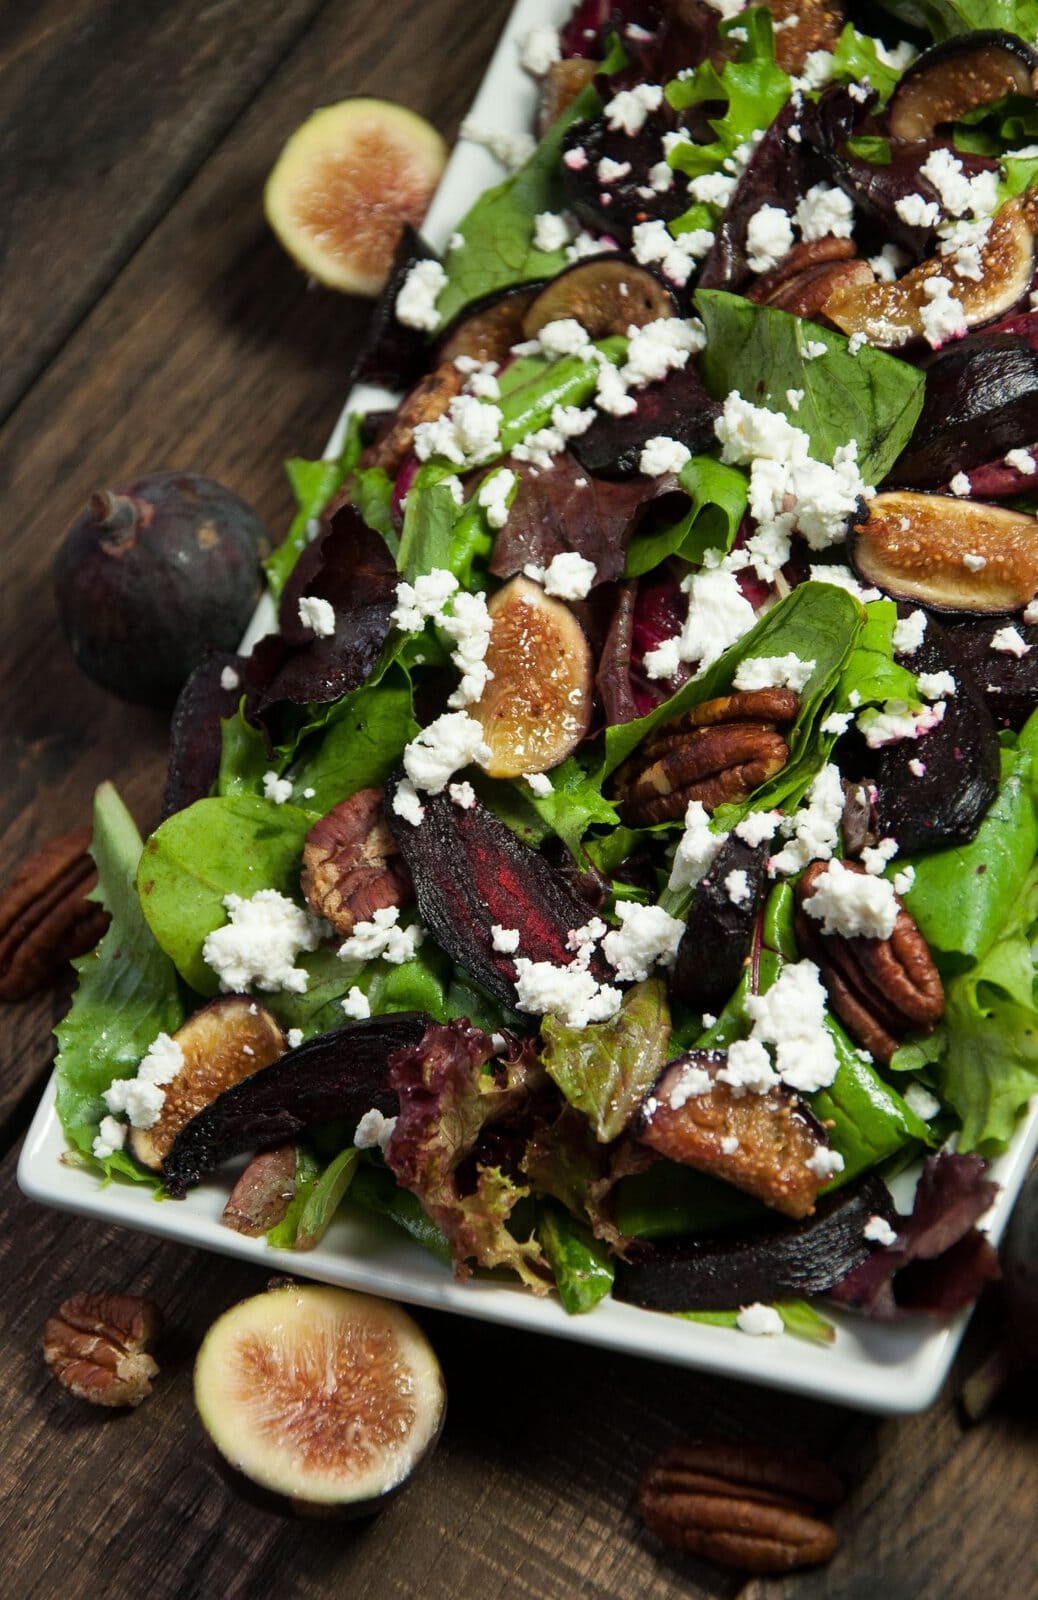 Beet Salad with Feta and Figs - Feasting not Fasting